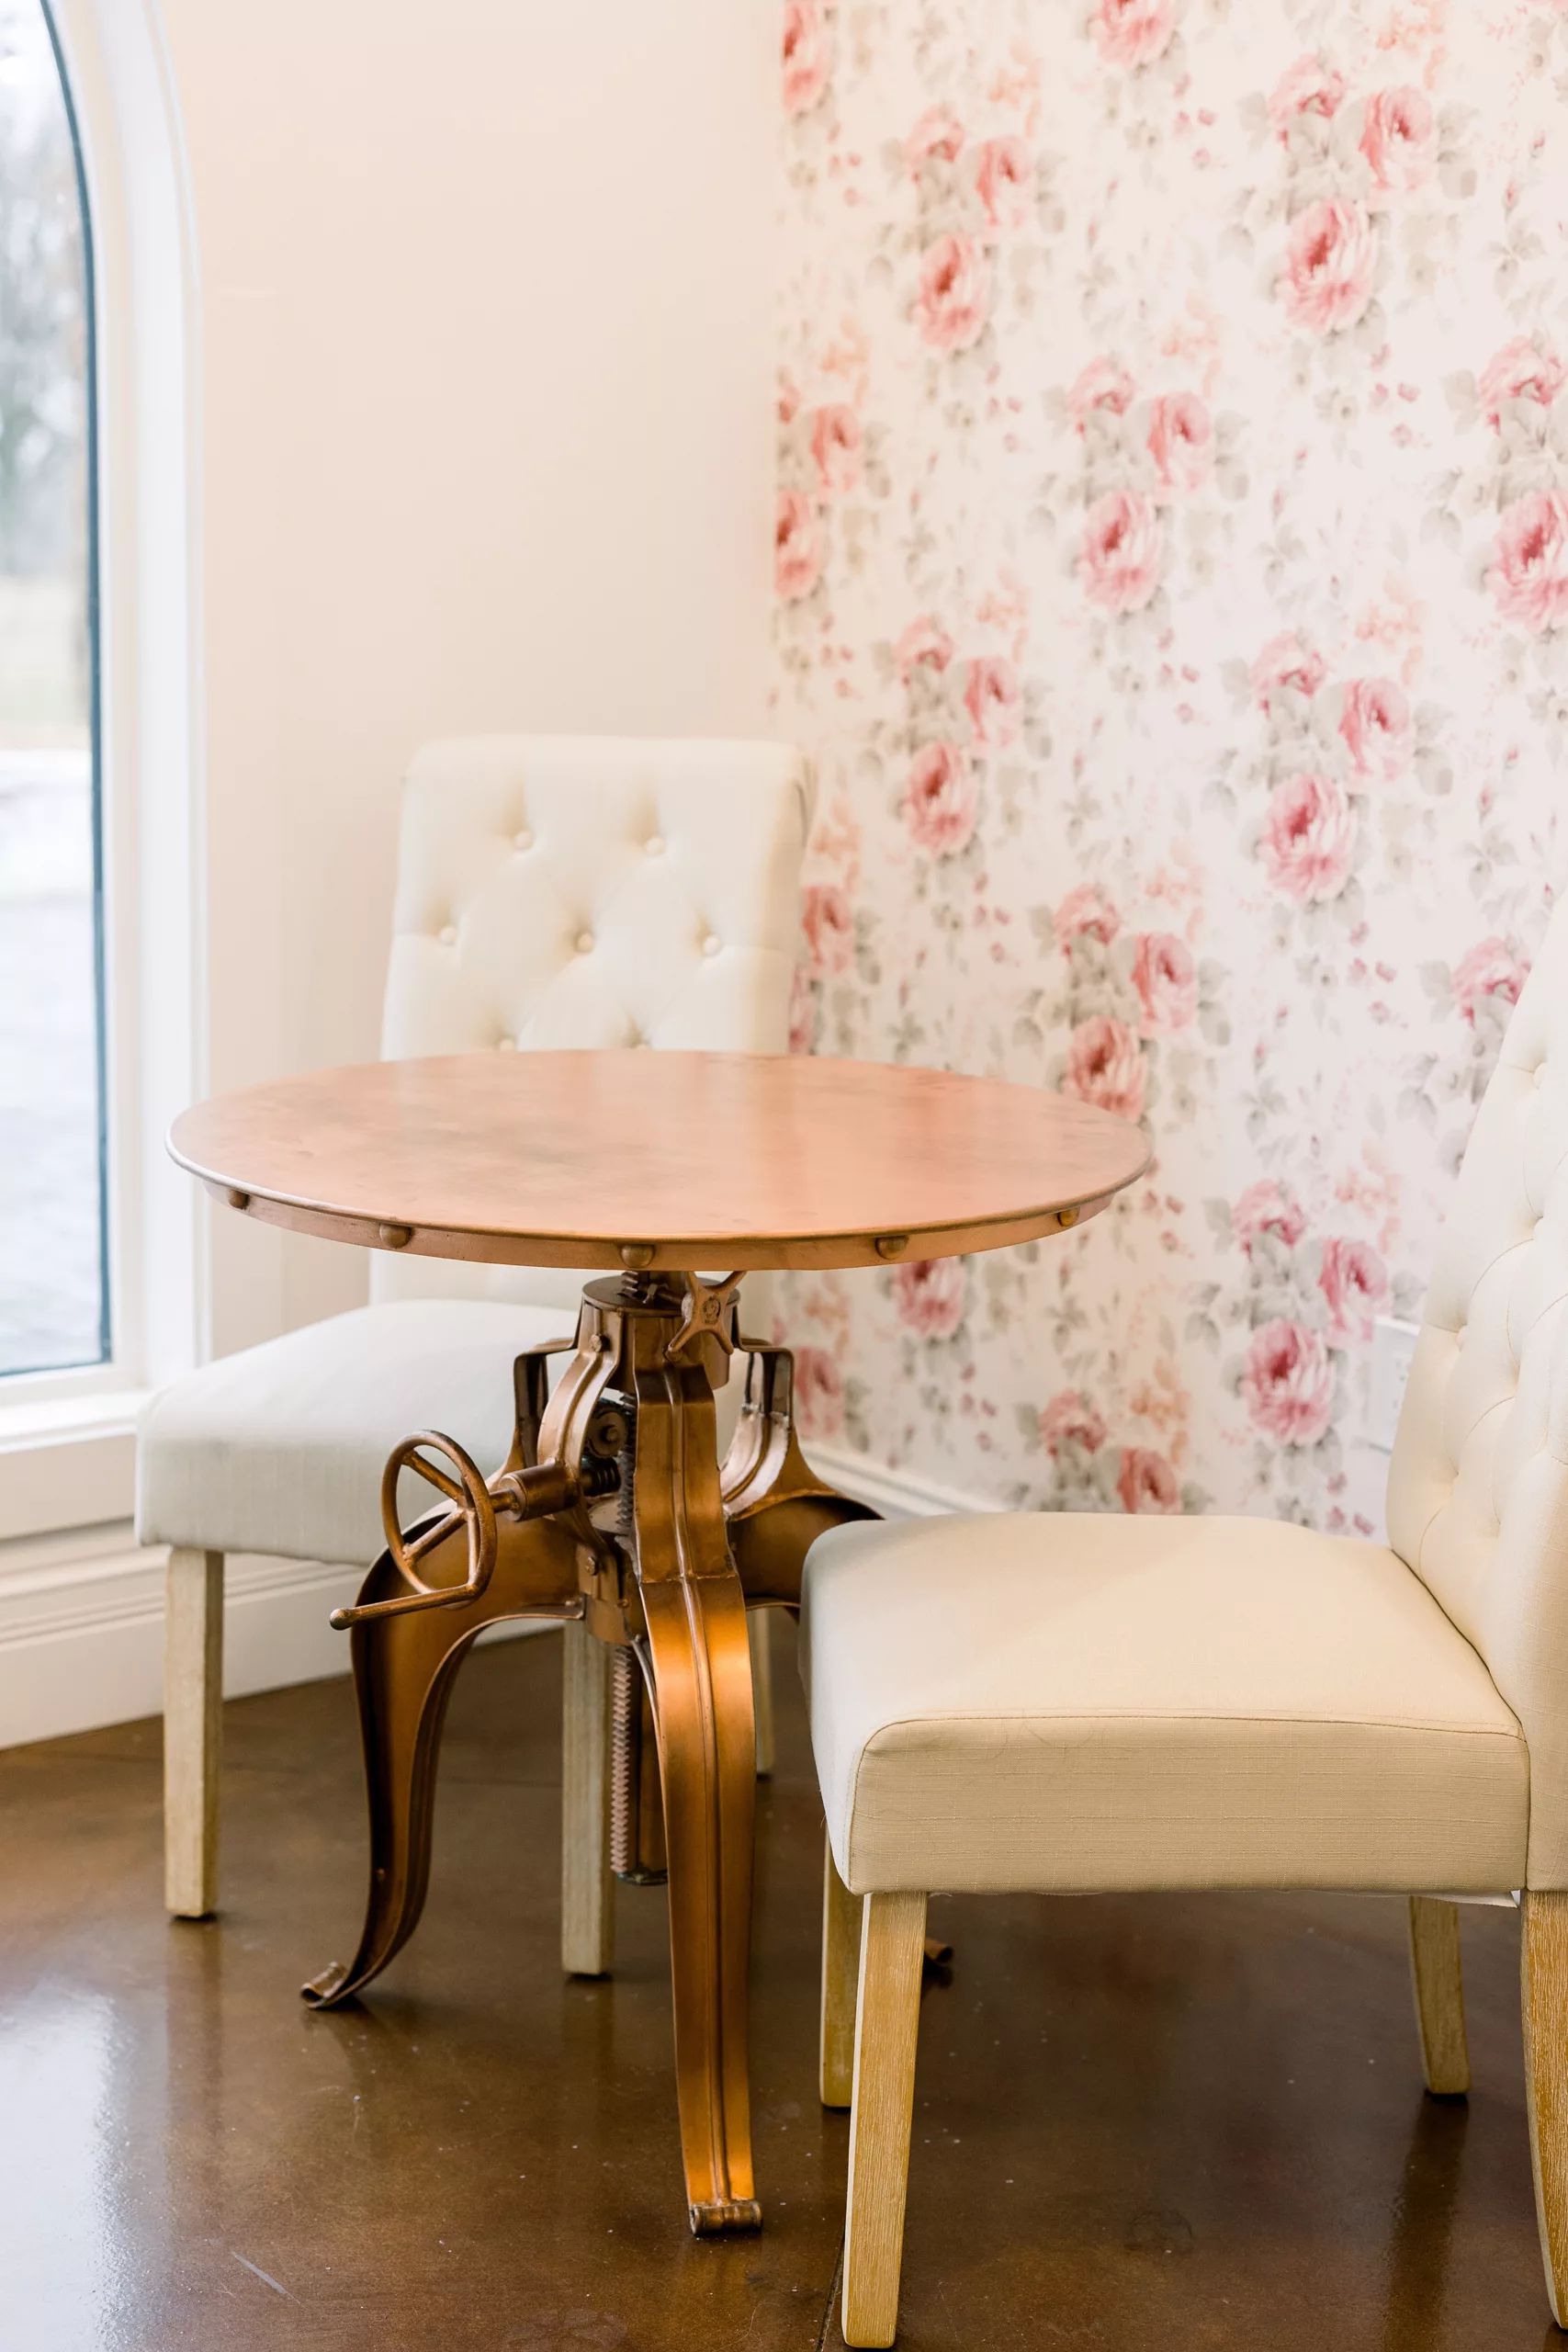 A table and chairs in the bridal suite against a pink rose wallpaper wall